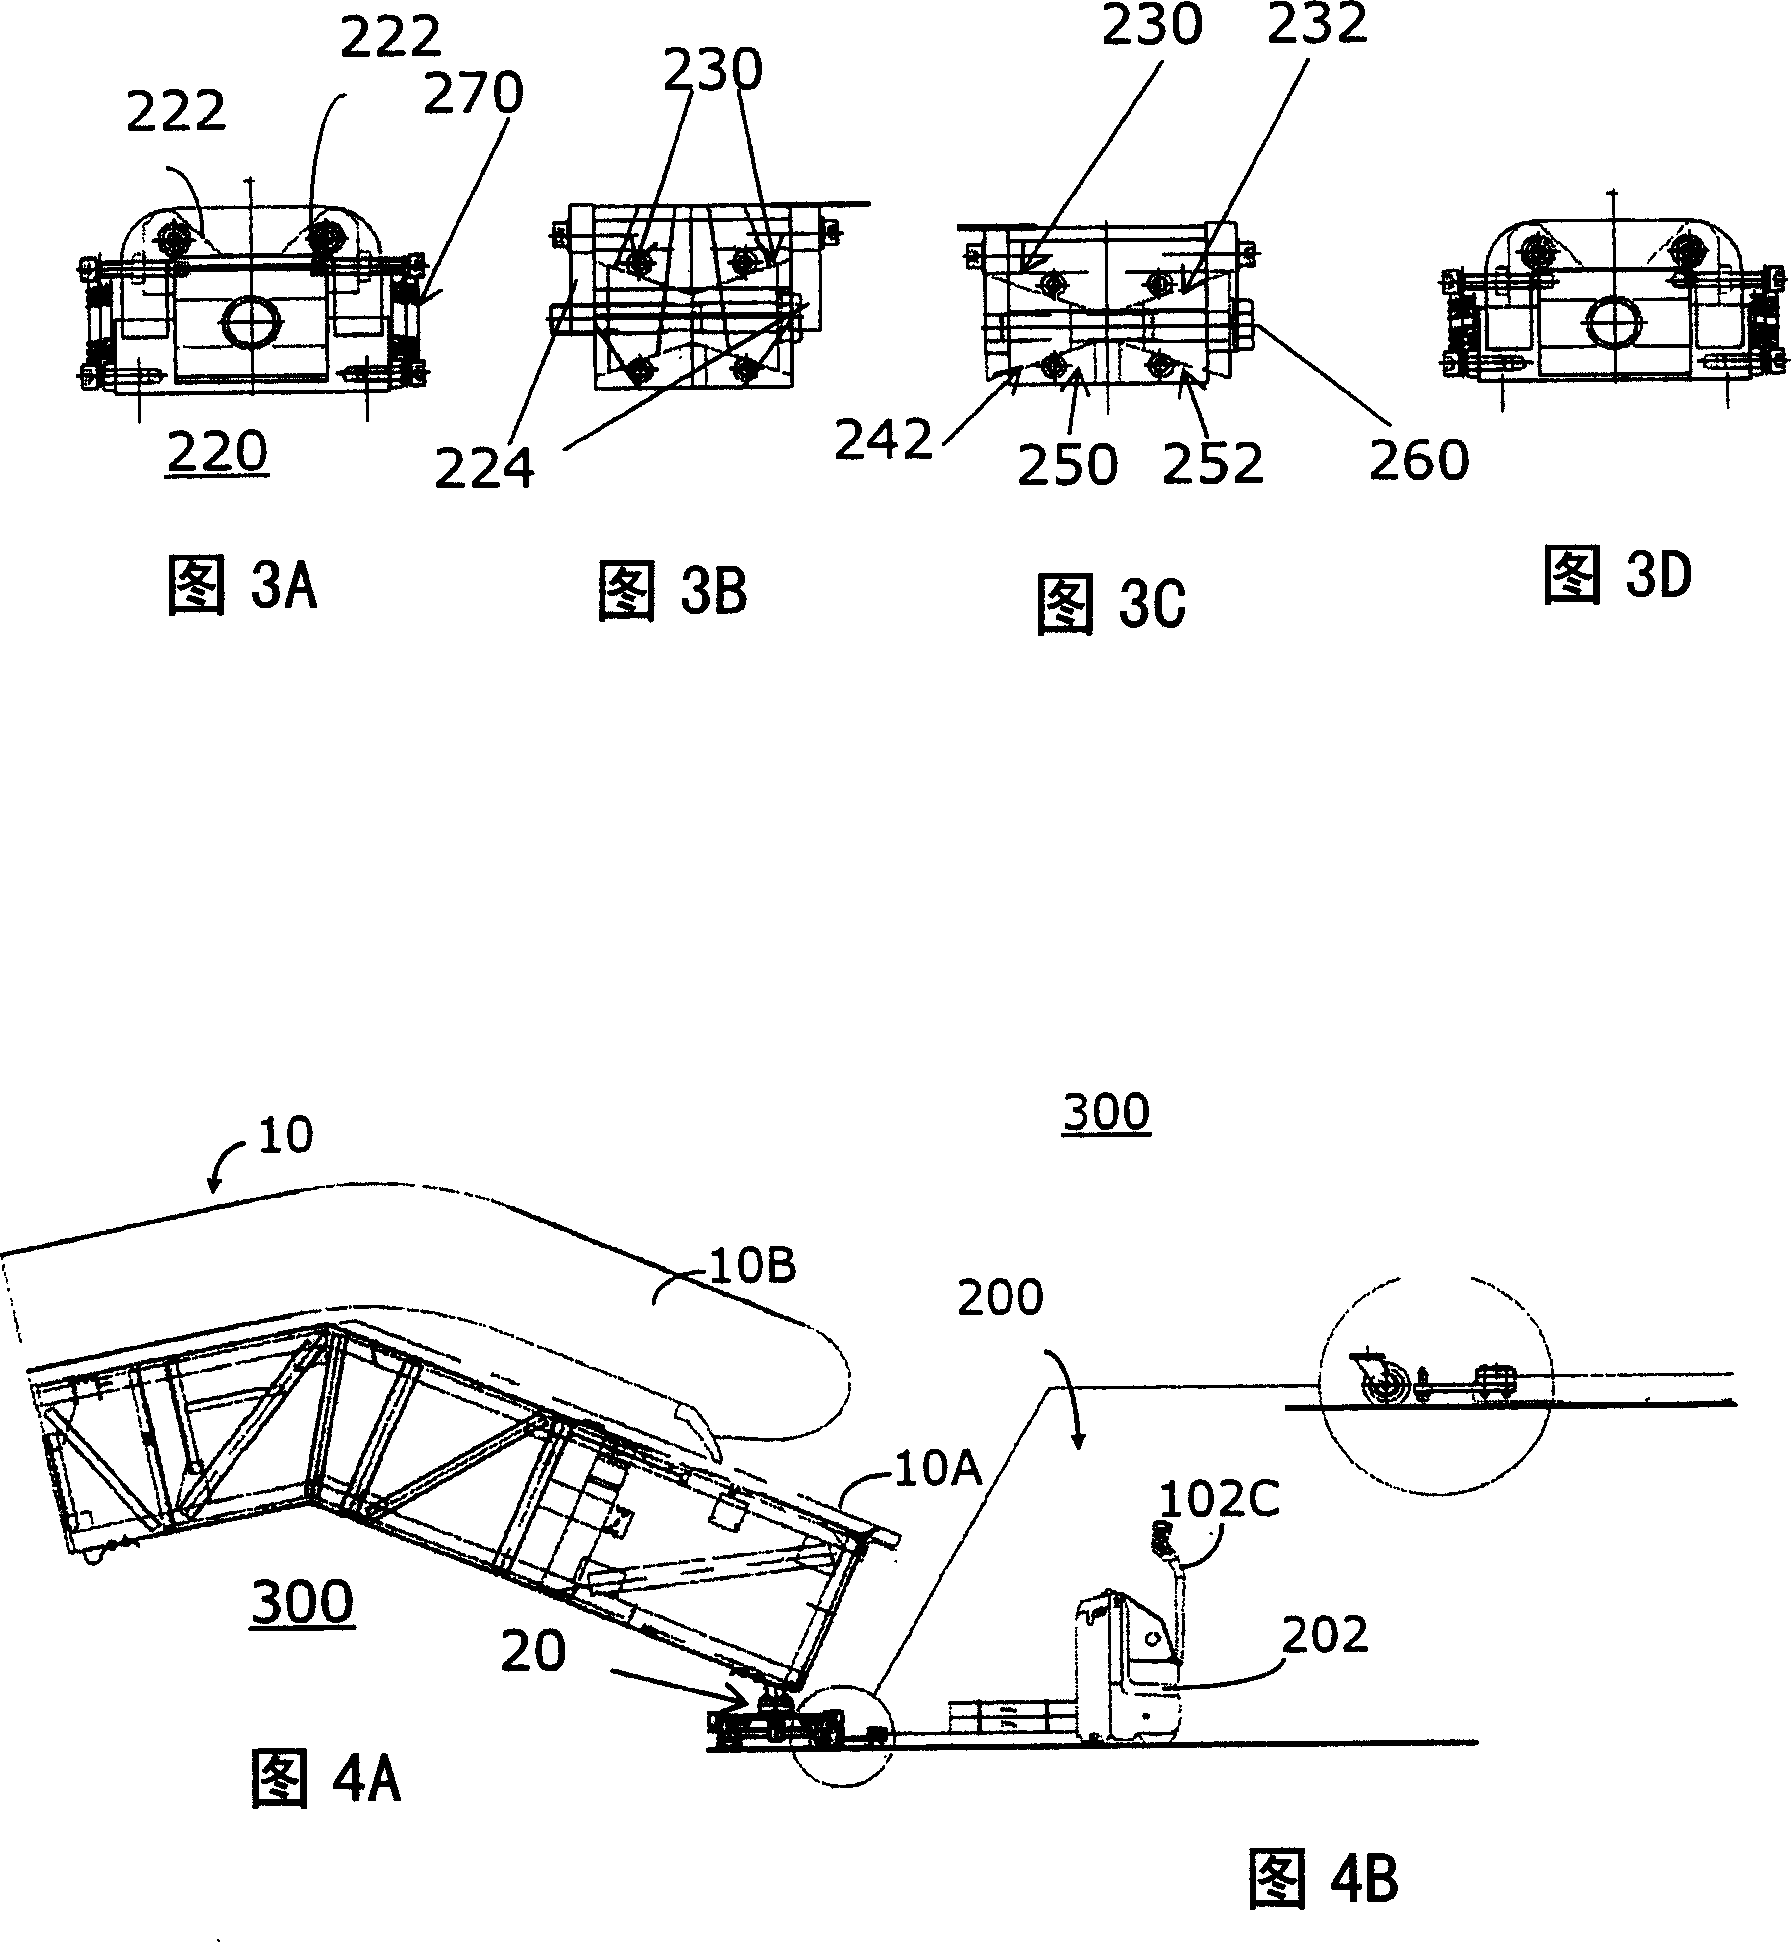 Transportation system cradle, intermediate product, assembly plant, and method for manufacturing assembly